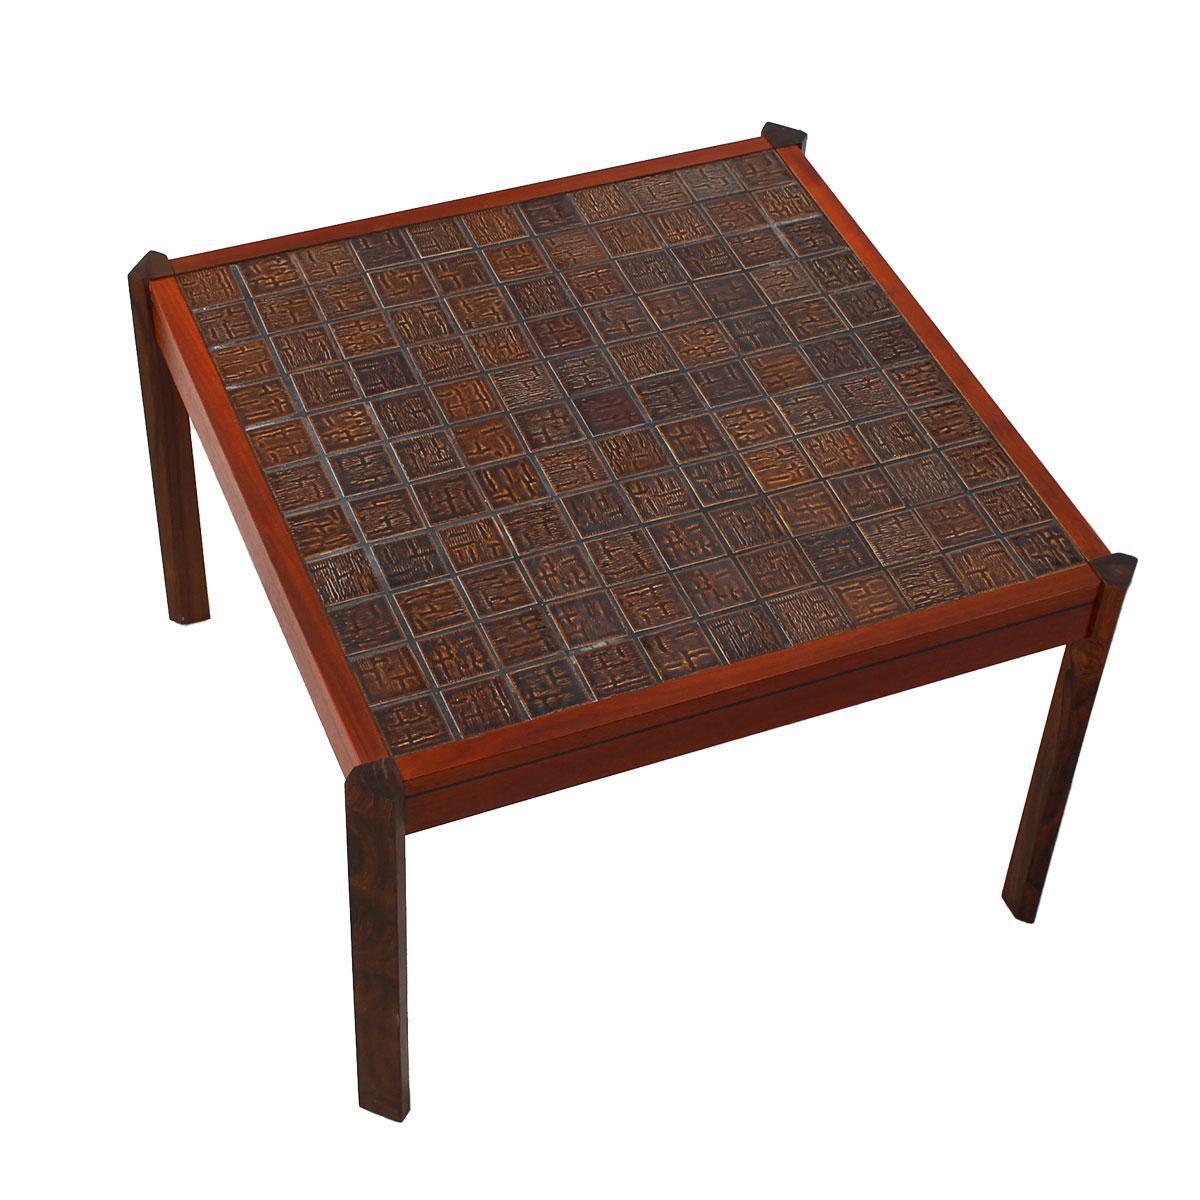 Here is an interesting Danish Modern table. The frame is light with contrasting darker legs. The top of the table is covered with tiles in variegated shades of reddish-brown tying the two wood tones together perfectly. The tile has texture and the